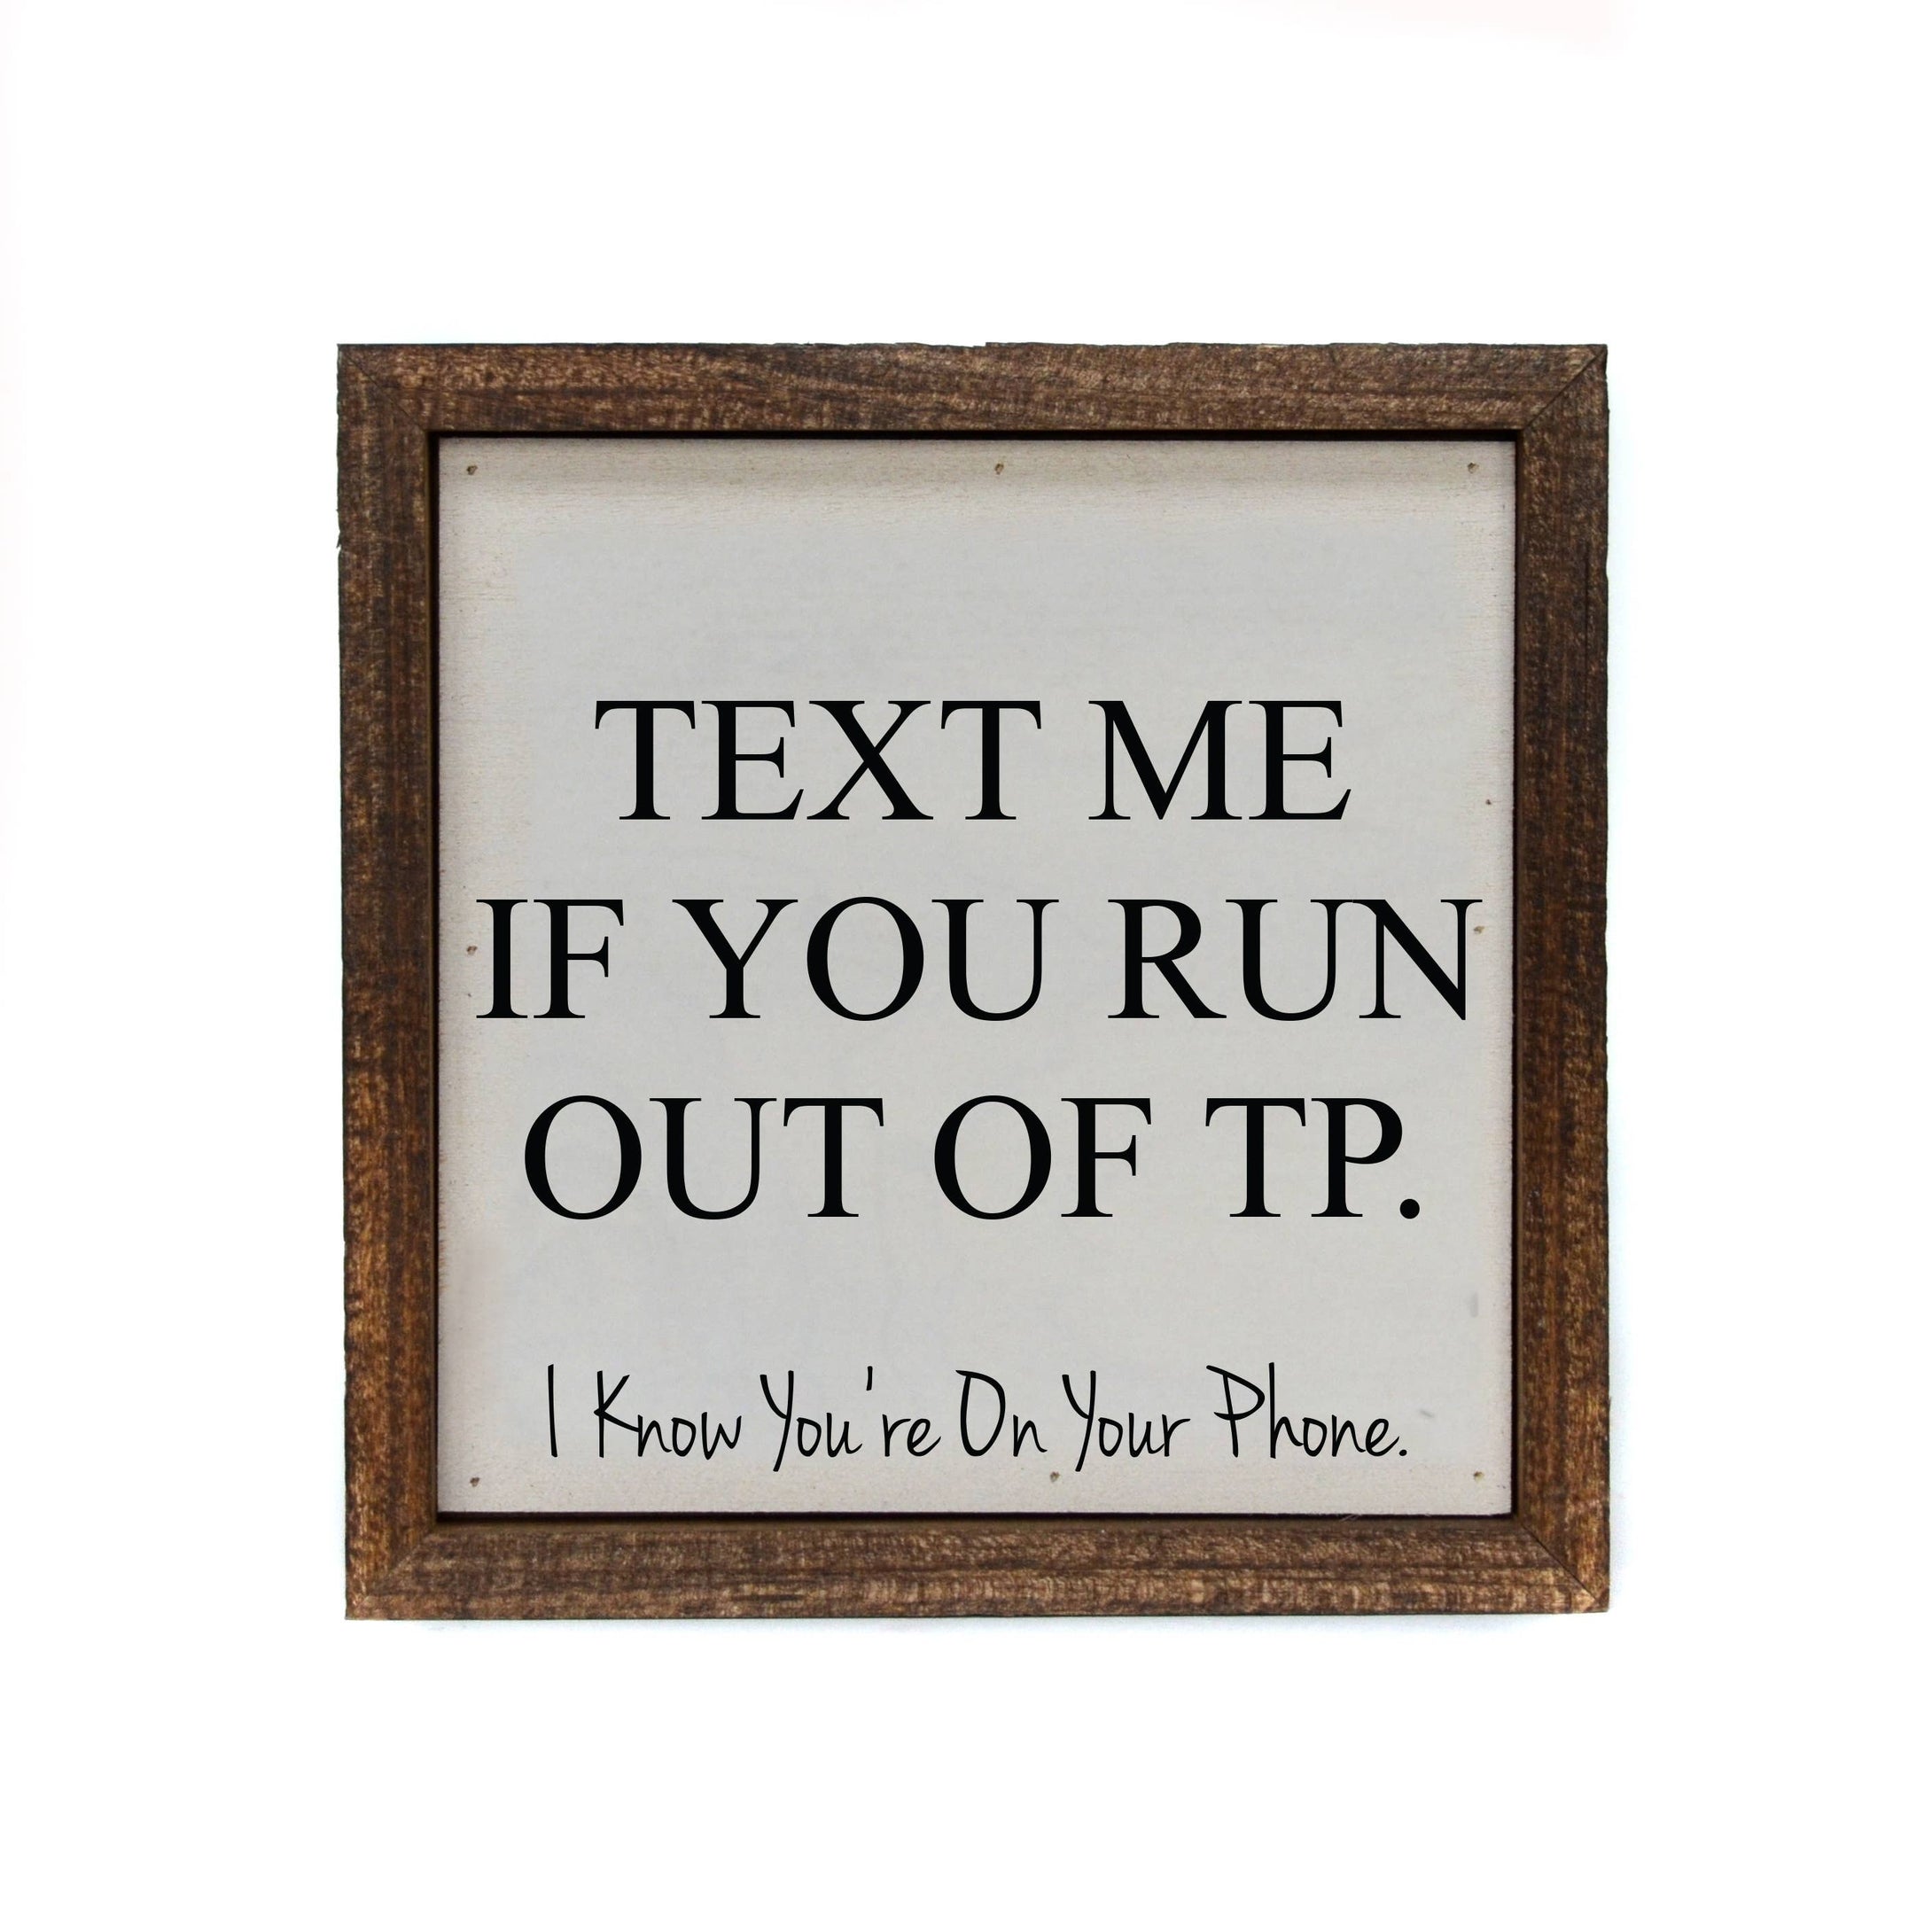 “Text Me If You Run Out Of TP” 6”x6” Funny Wooden Bathroom Sign